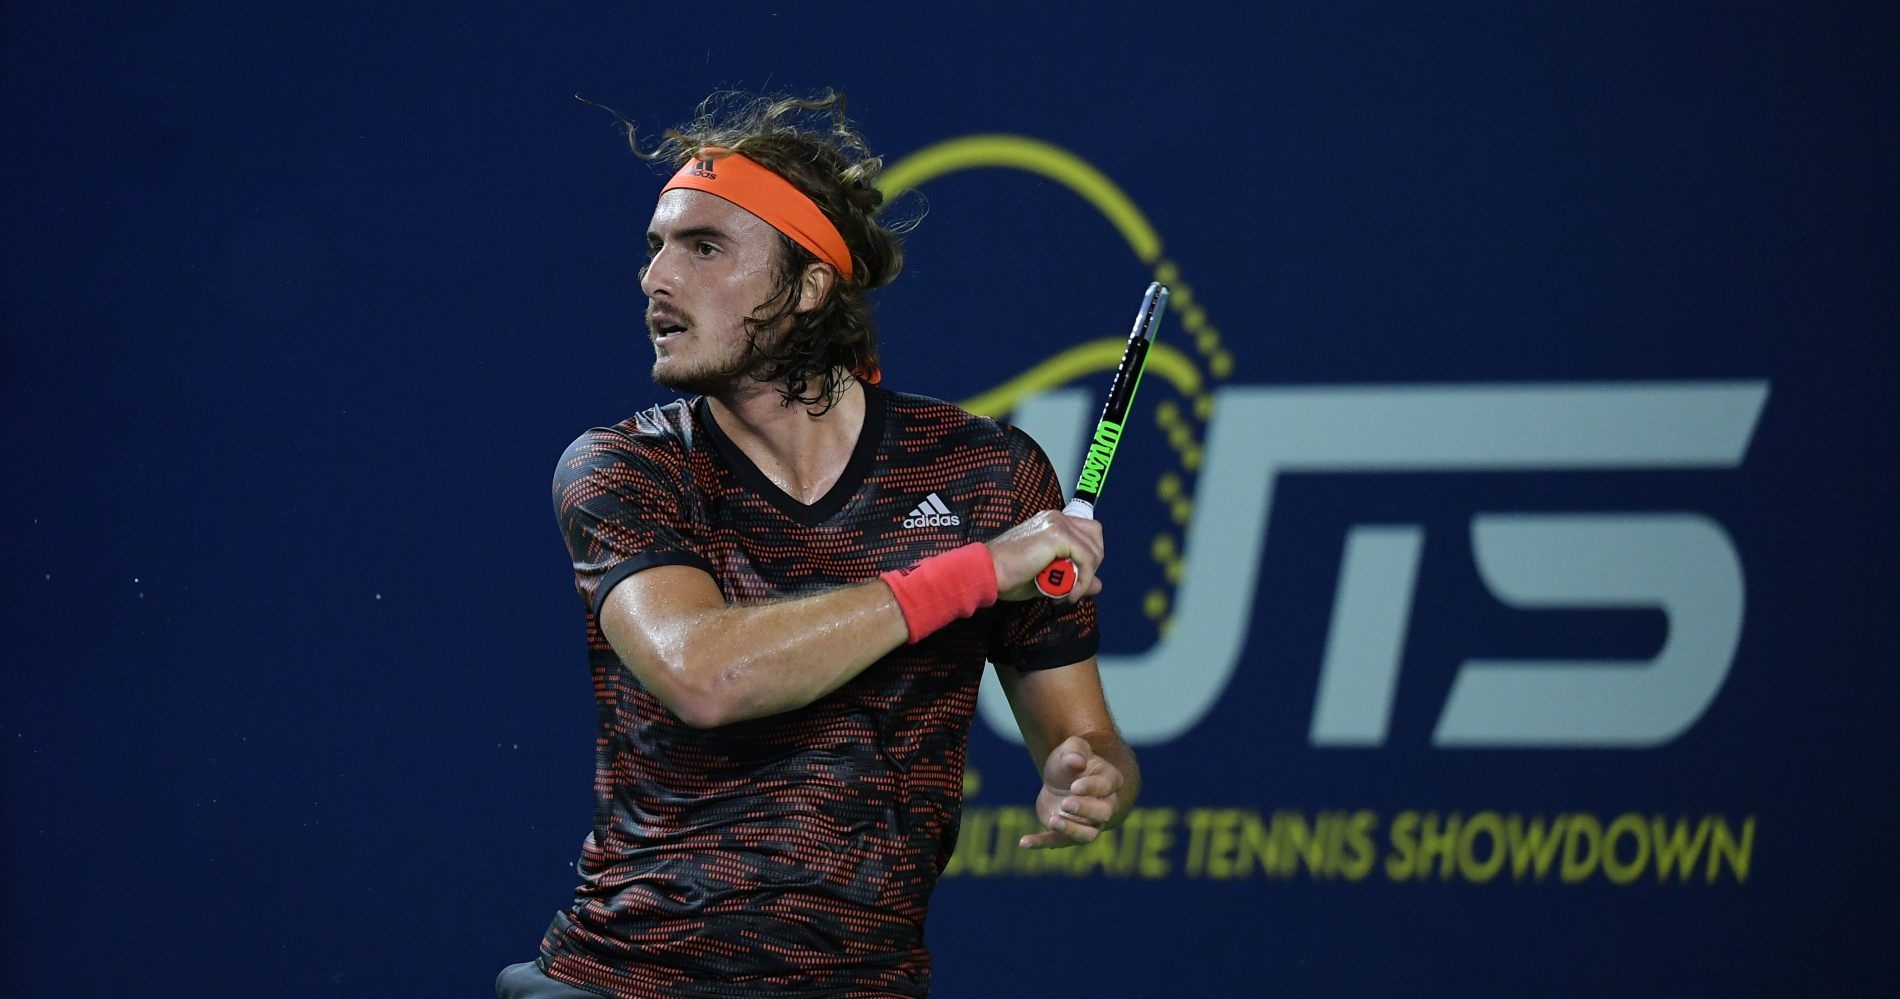 Tsitsipas leads Ultimate Tennis Showdown after Day 6